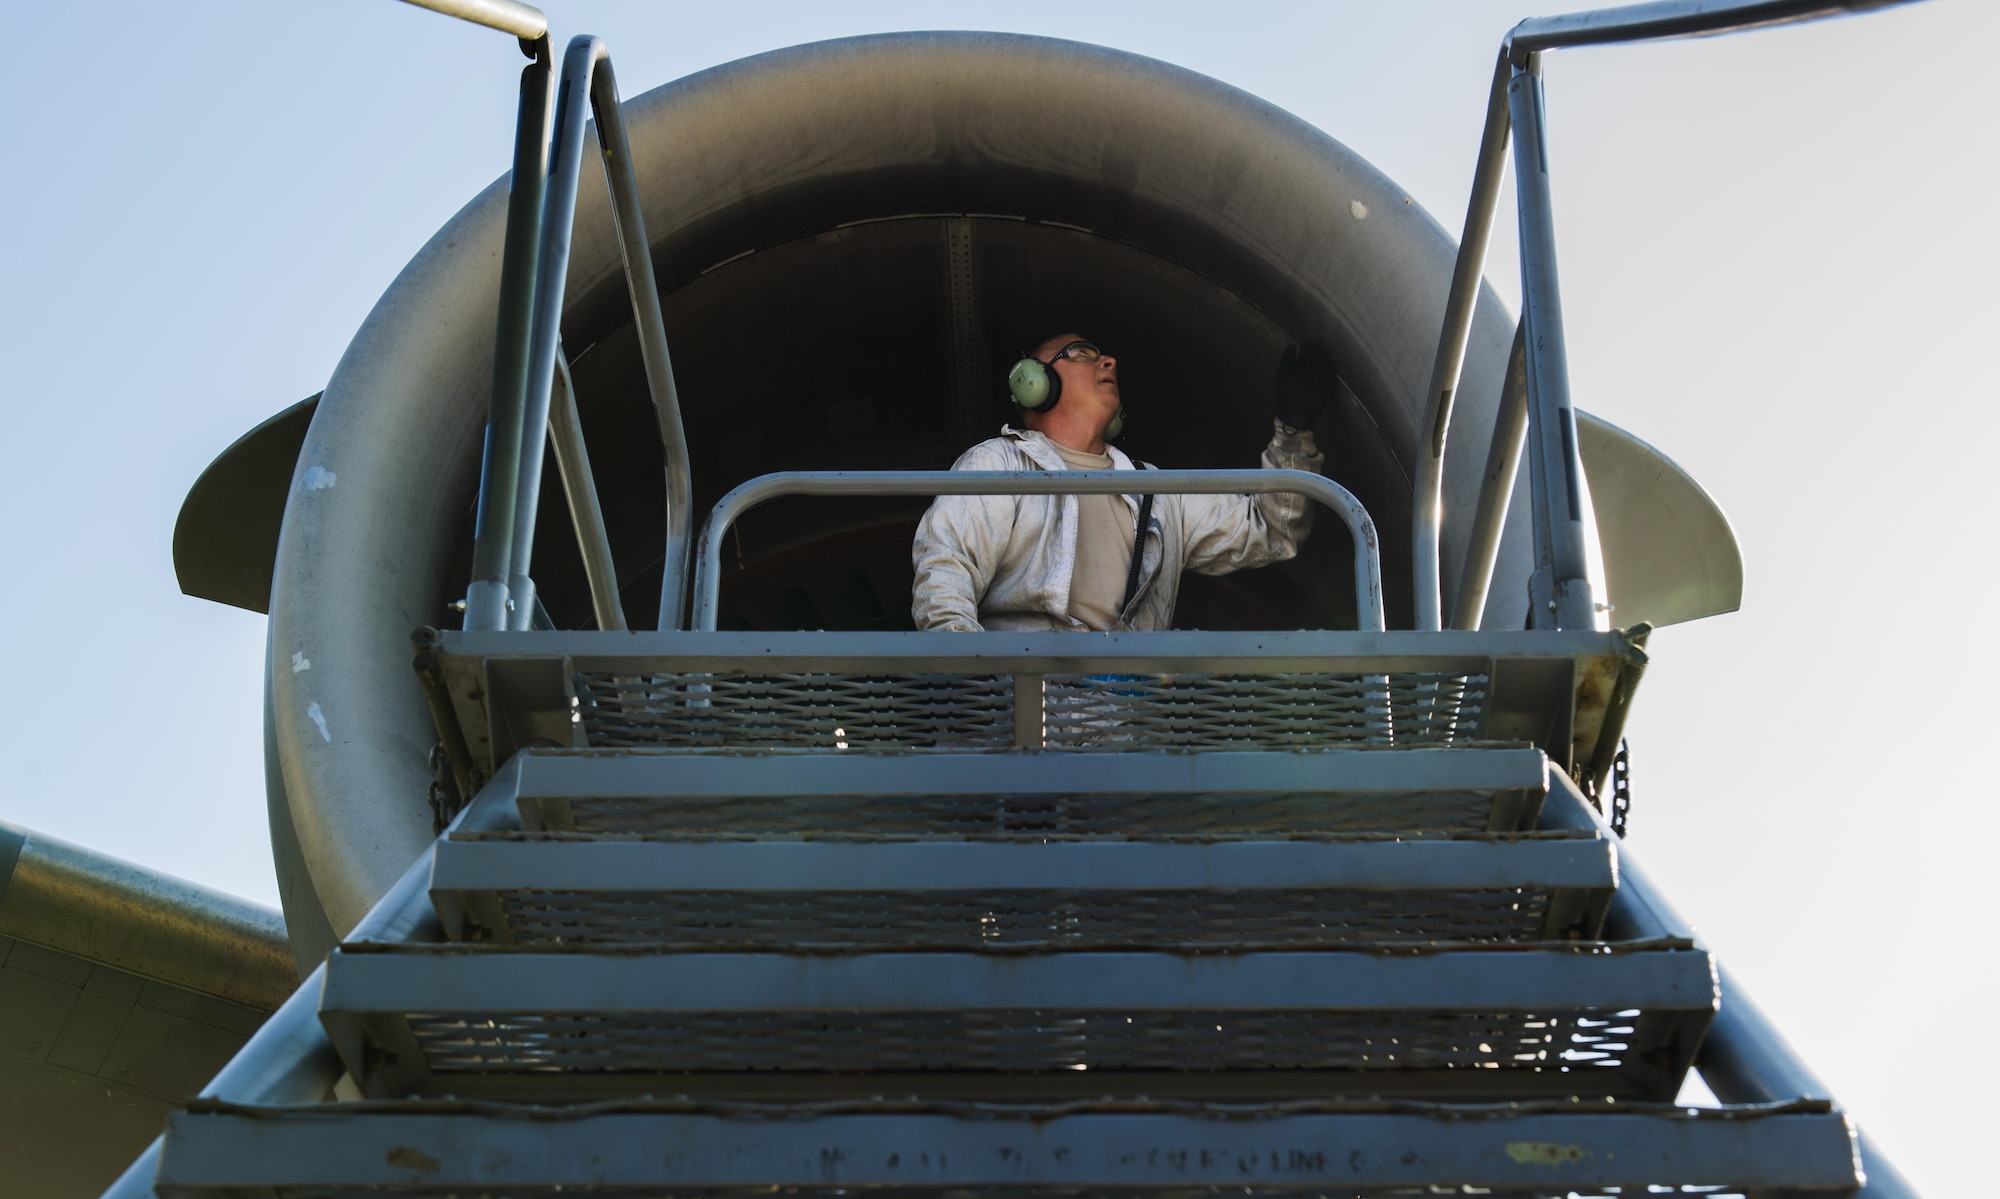 Senior Airman John Urban, 452nd Maintenance Squadron jet engine technician, inspects the engine of a C-17 Globemaster III during a routine maintenance check Sept. 22, 2016 at Ramstein Air Base, Germany. Airmen from the 452nd MXS worked with the 721st Aircraft Maintenance Squadron while at Ramstein for a temporary duty. Routine inspections of aircraft ensure the safety of the crew and allow the mission to continue. (U.S. Air Force photo/Senior Airman Tryphena Mayhugh)